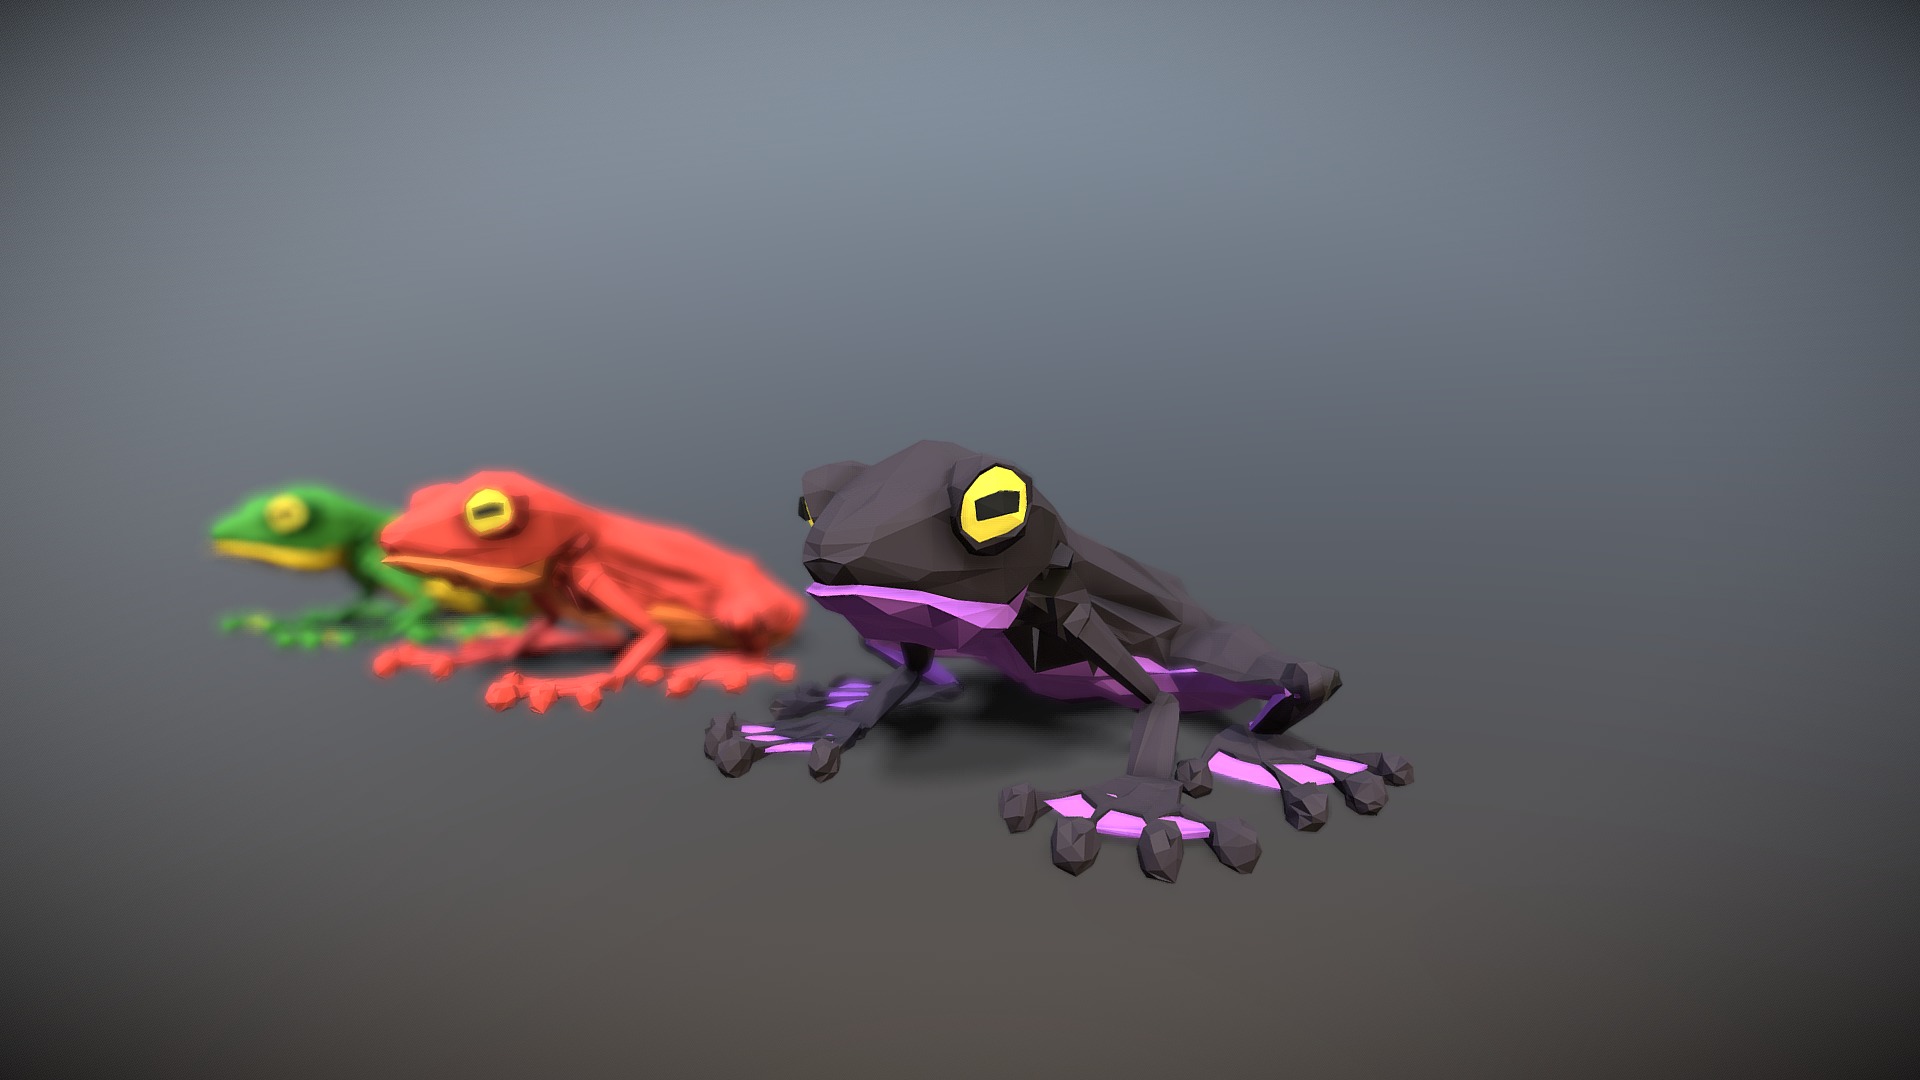 3D model Low Poly Frogs - This is a 3D model of the Low Poly Frogs. The 3D model is about a toy dinosaur with a yellow eye.